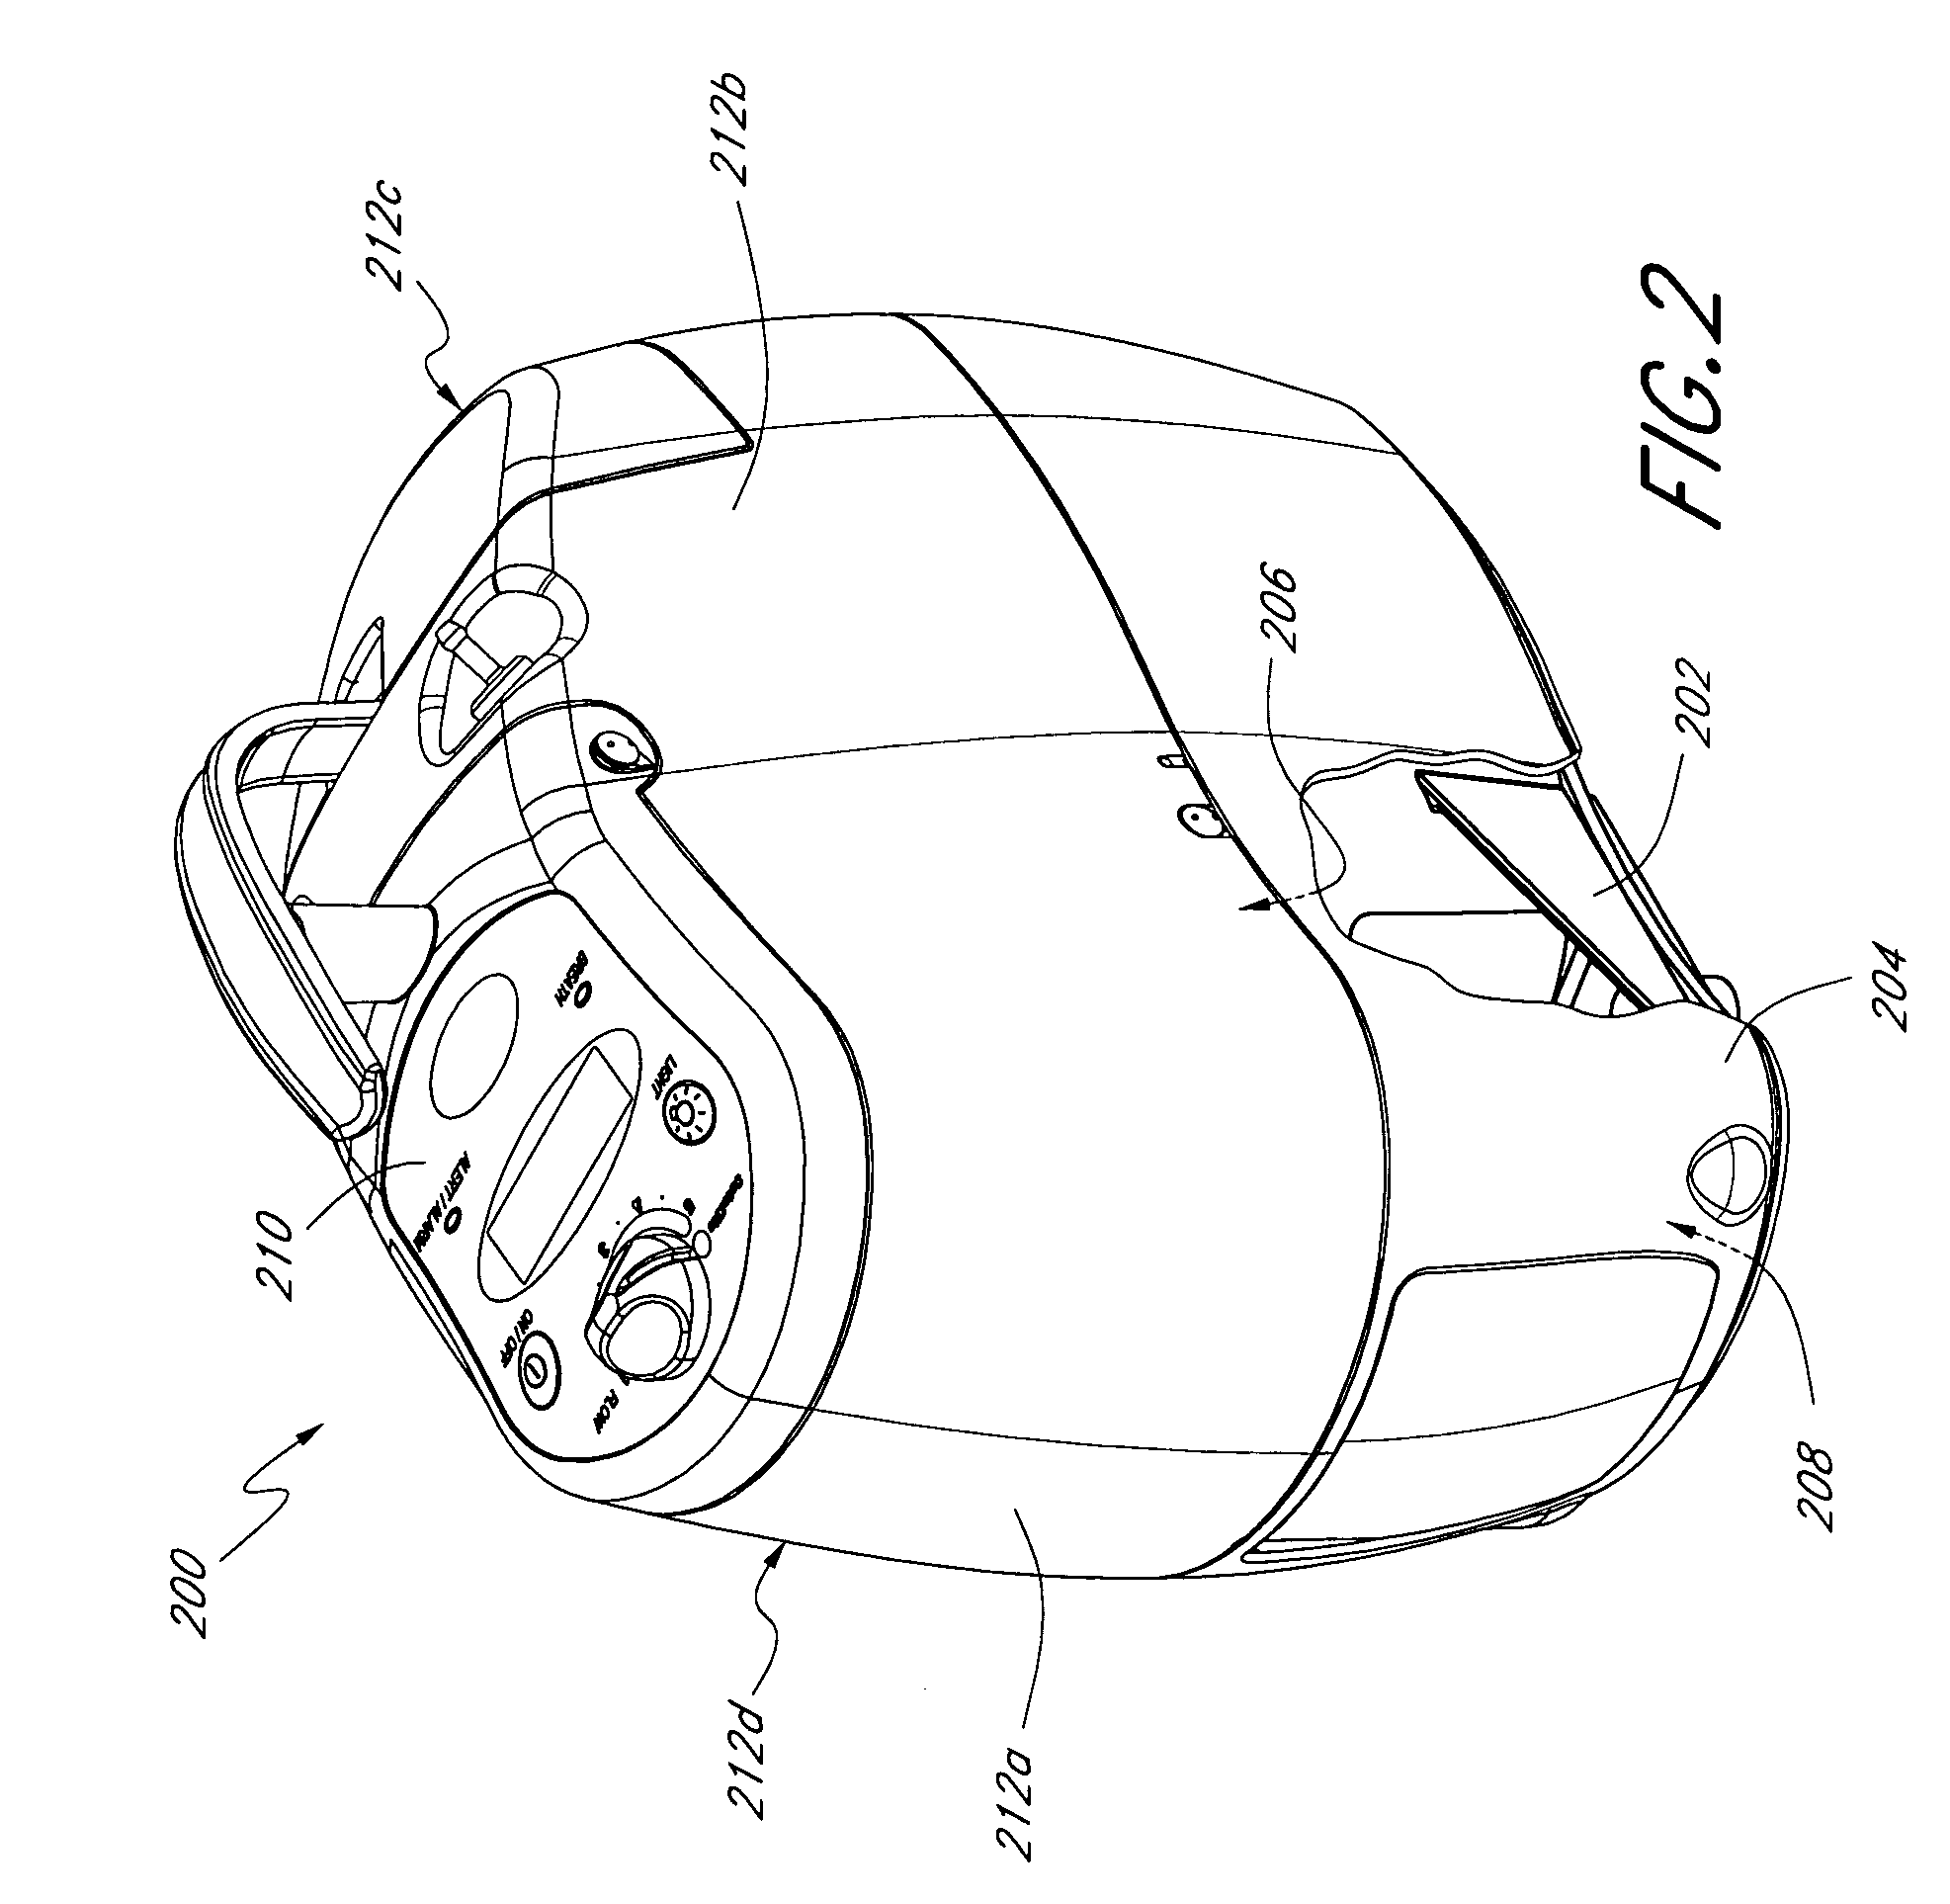 Portable gas fractionalization system